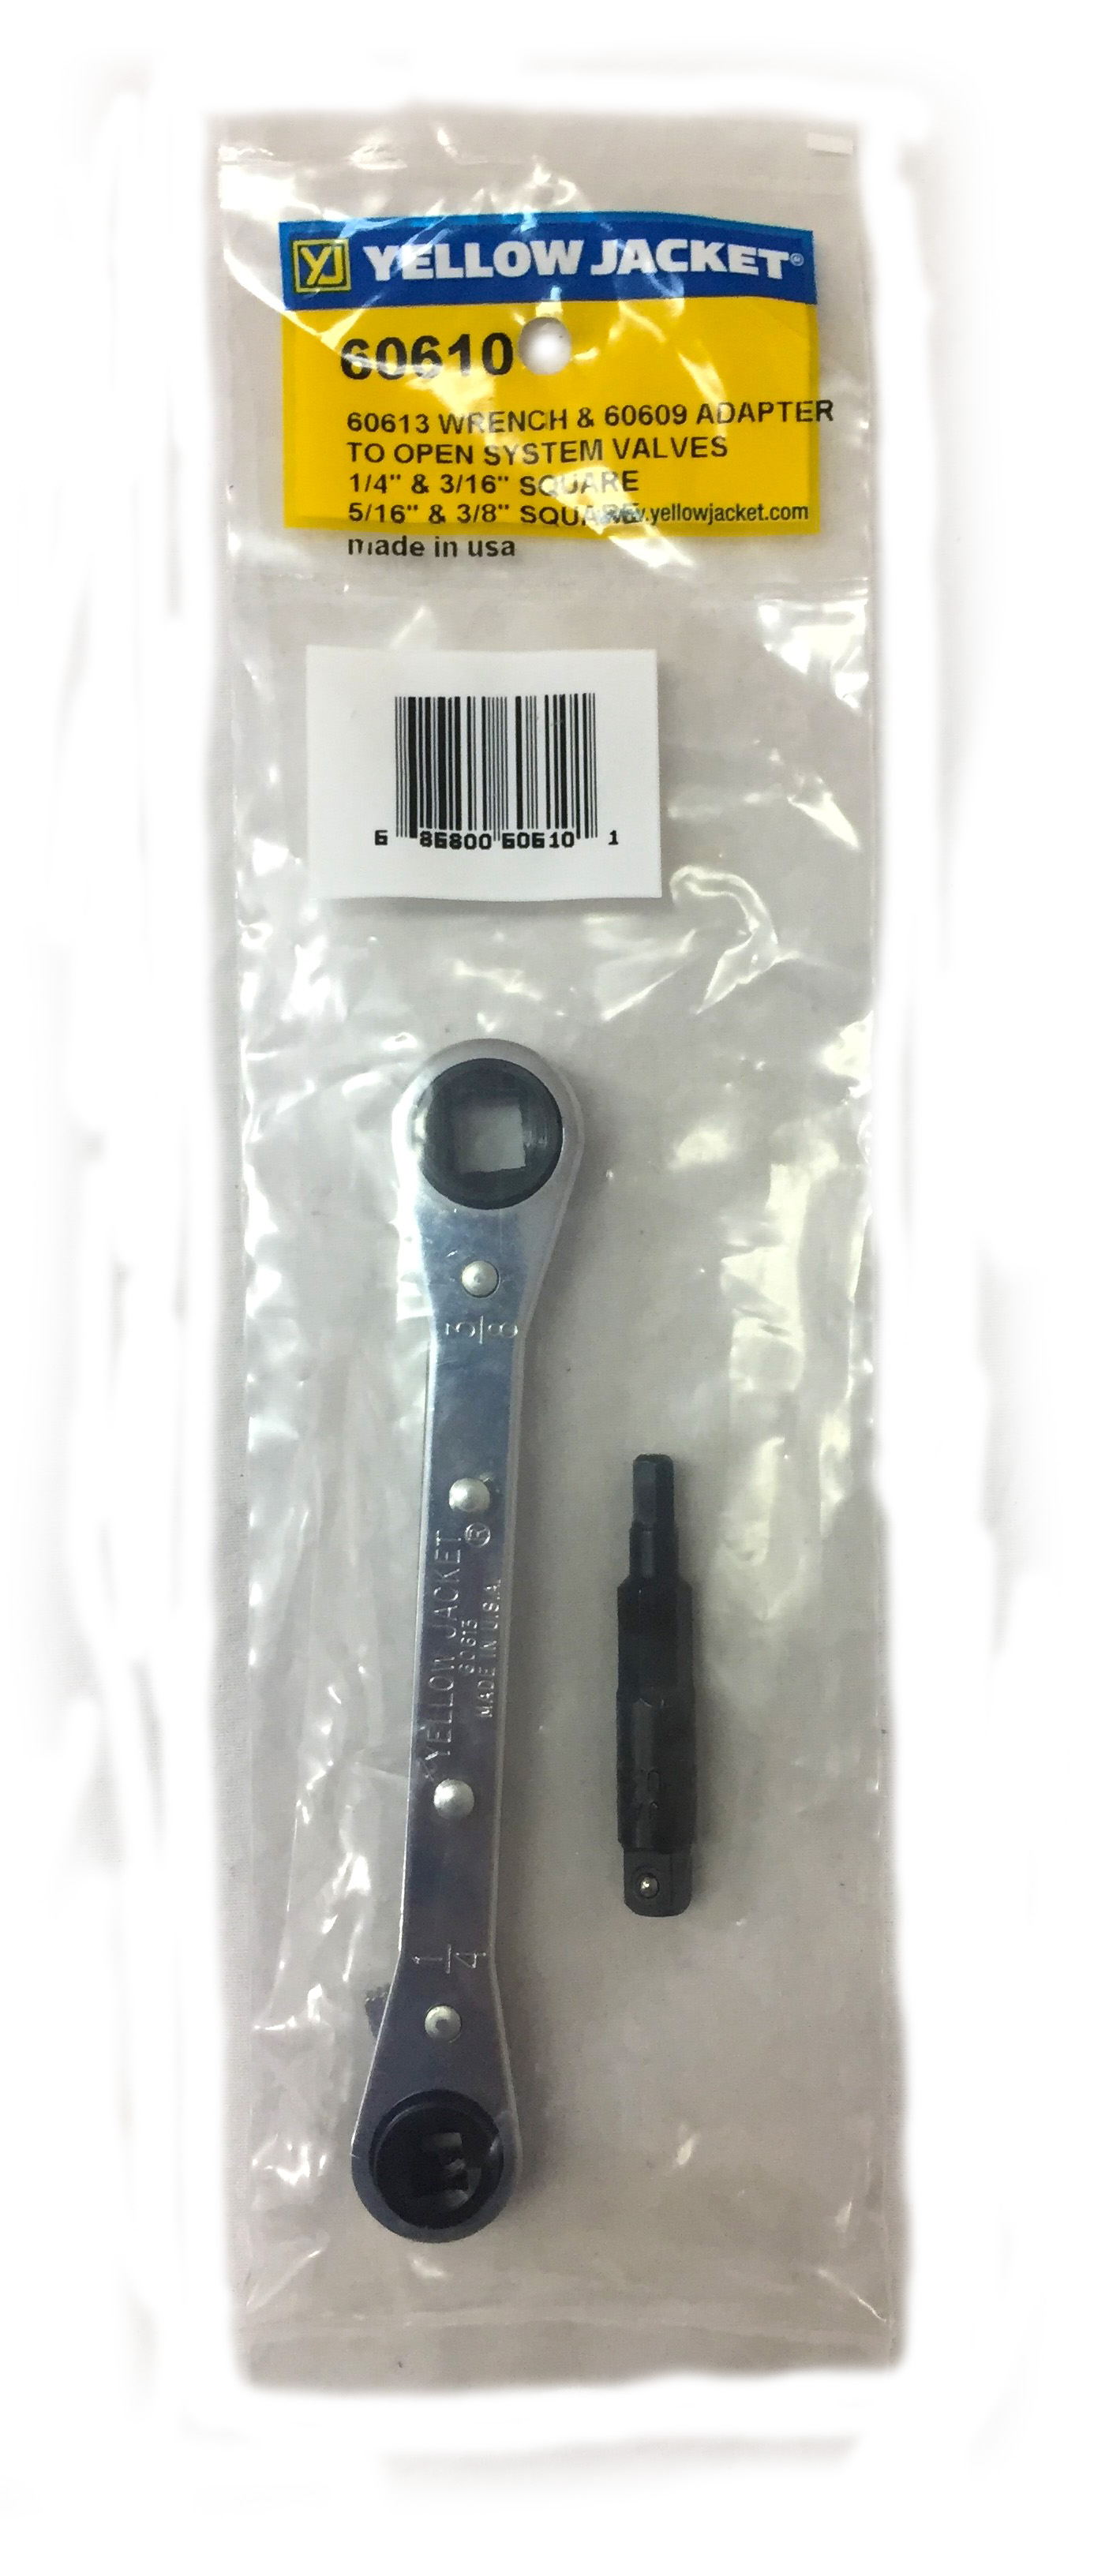 Yellow Jacket Combination Service Wrench and Adapter - 60610